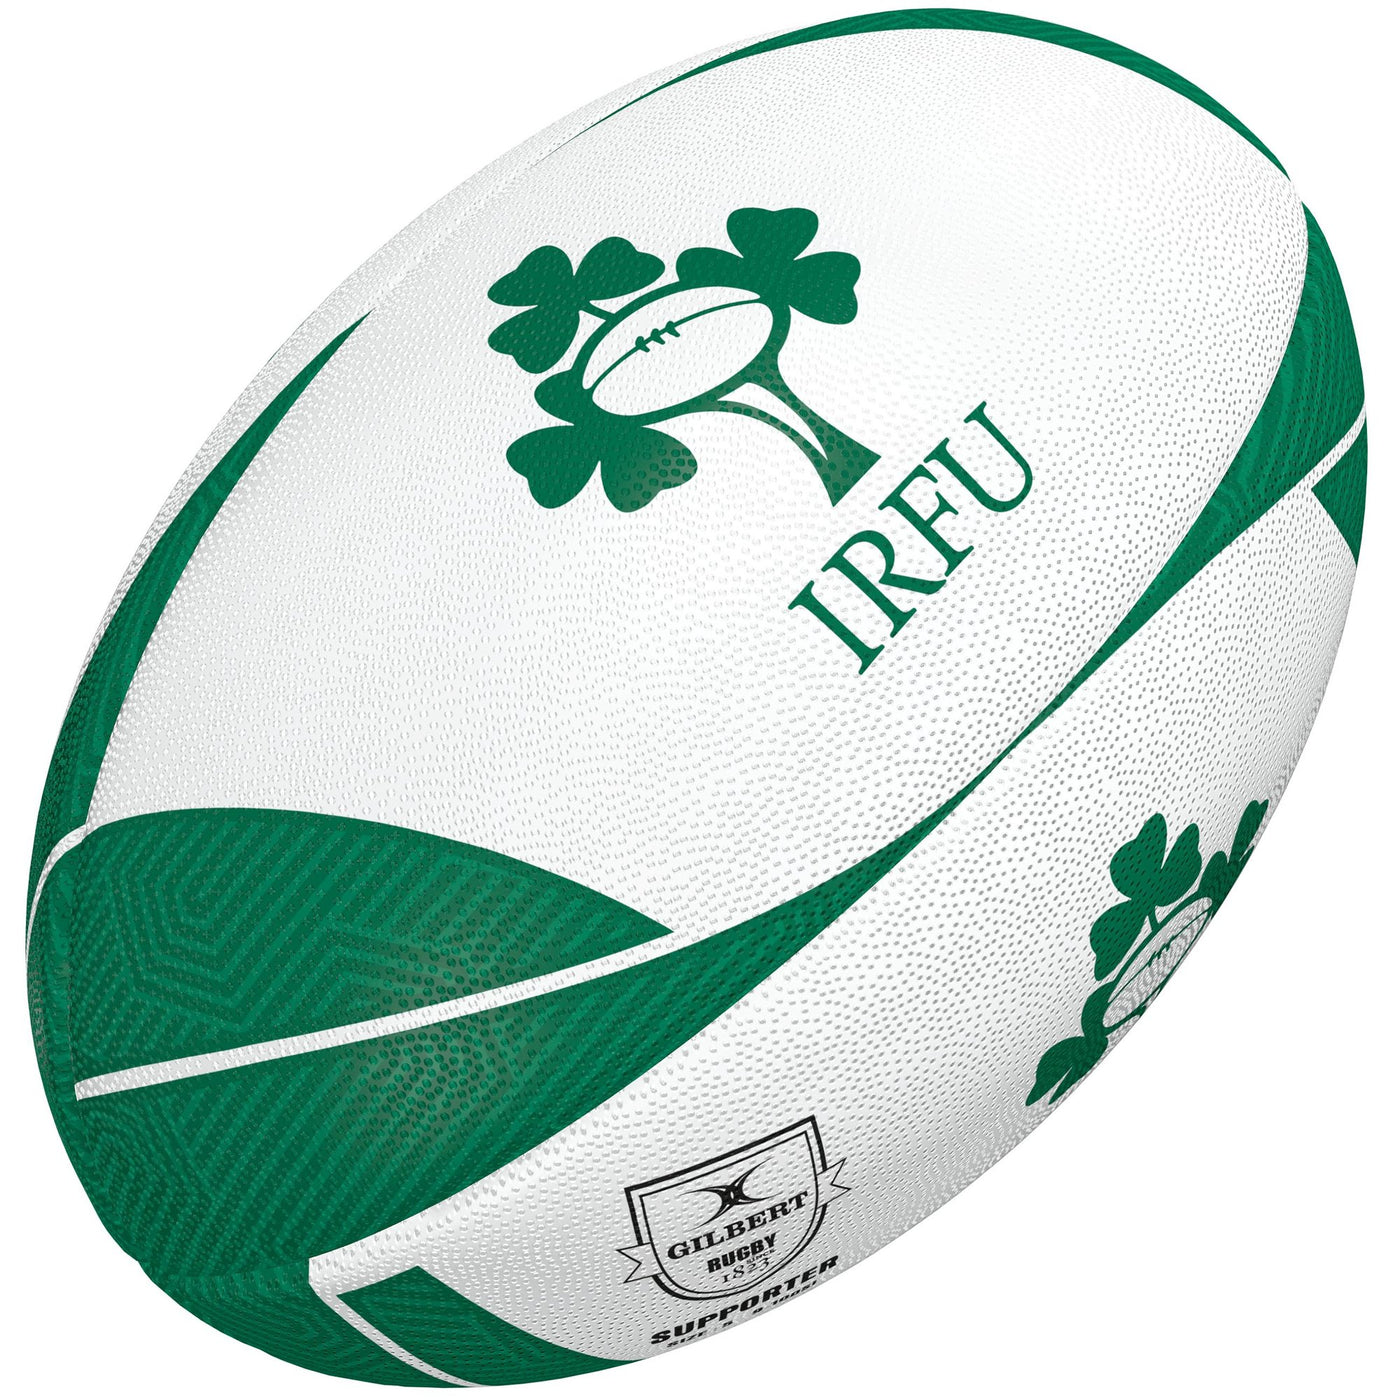 Ballon de Rugby Irlande Supporter Taille 4